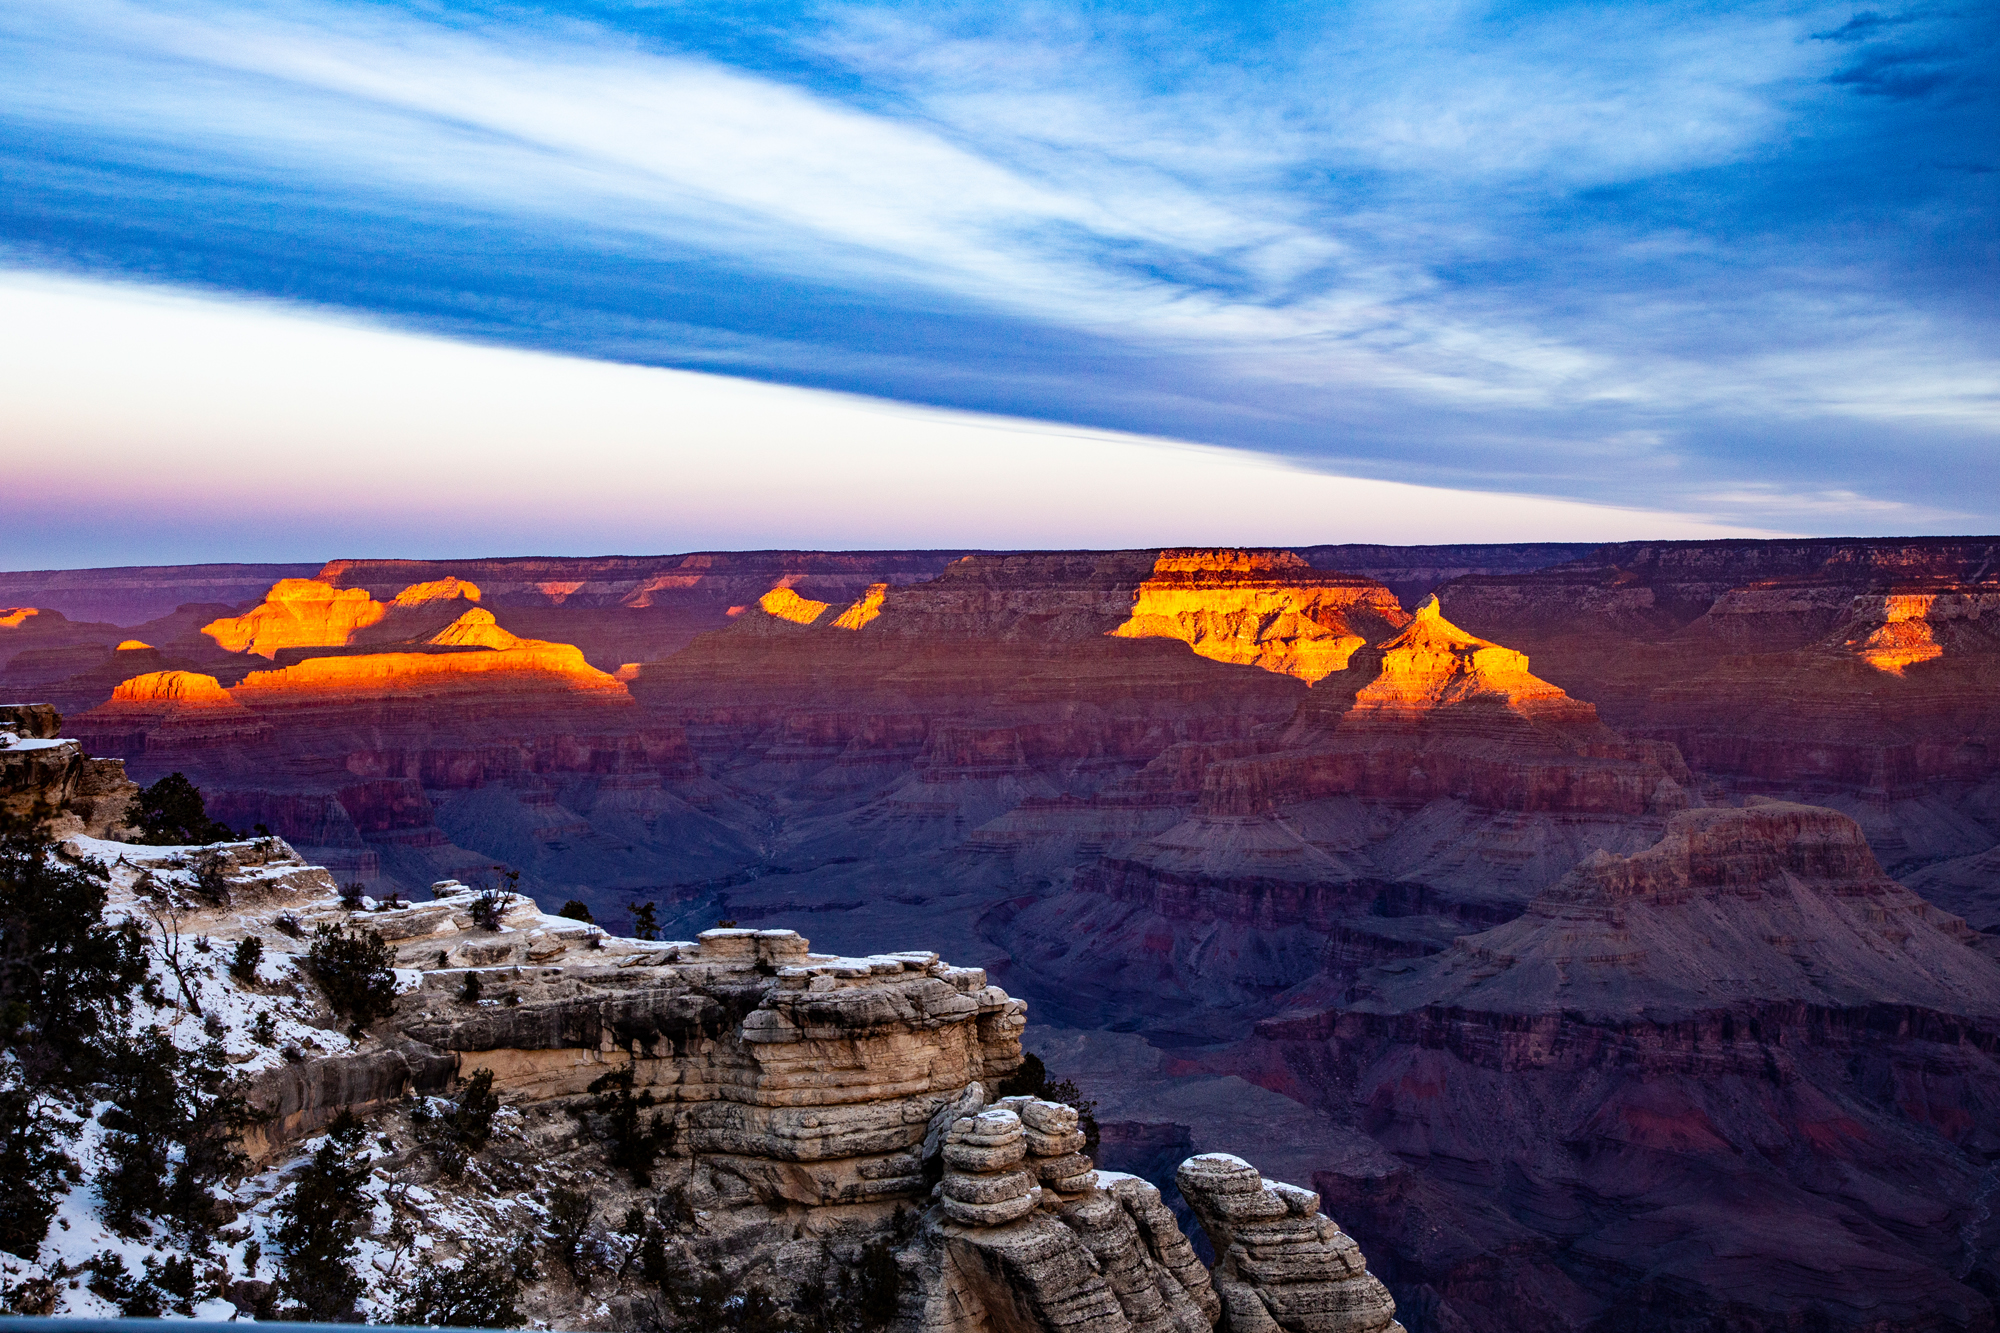 Sunrise over the Grand Canyon in winter. Golden hills, blue skies.